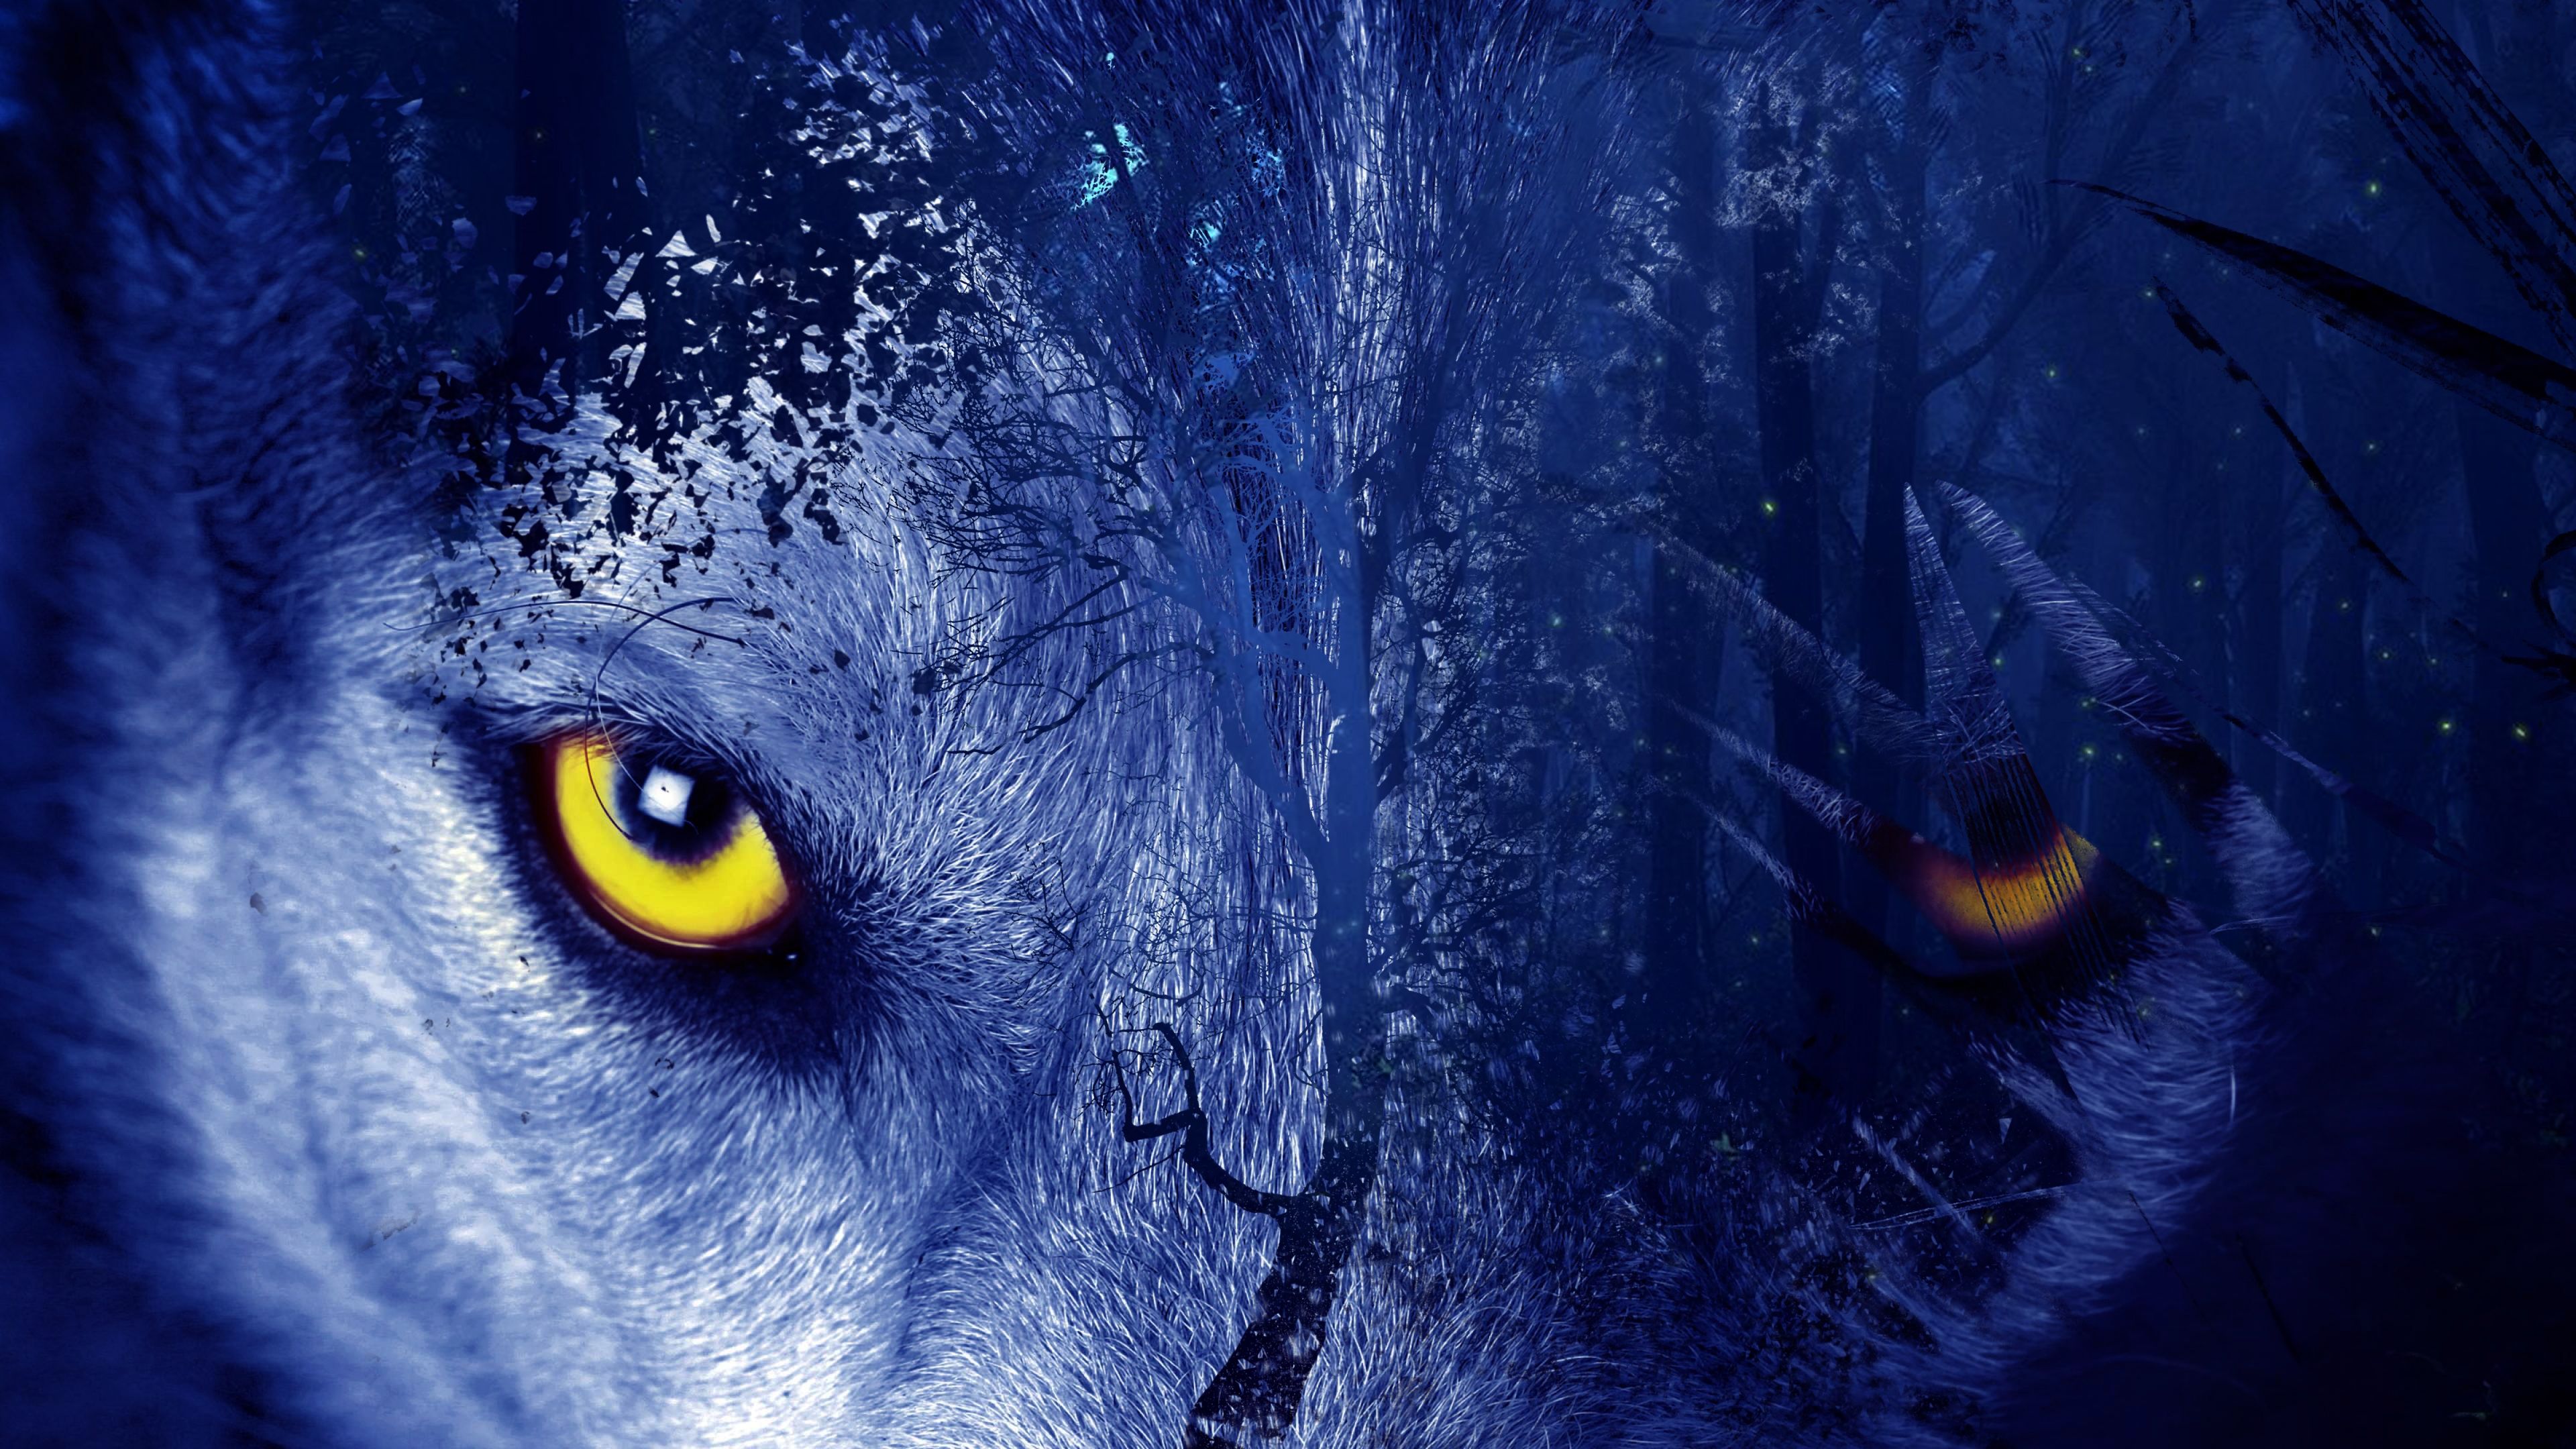 Mobile wallpaper Wolf Animal Eye Wolves 1082265 download the picture  for free